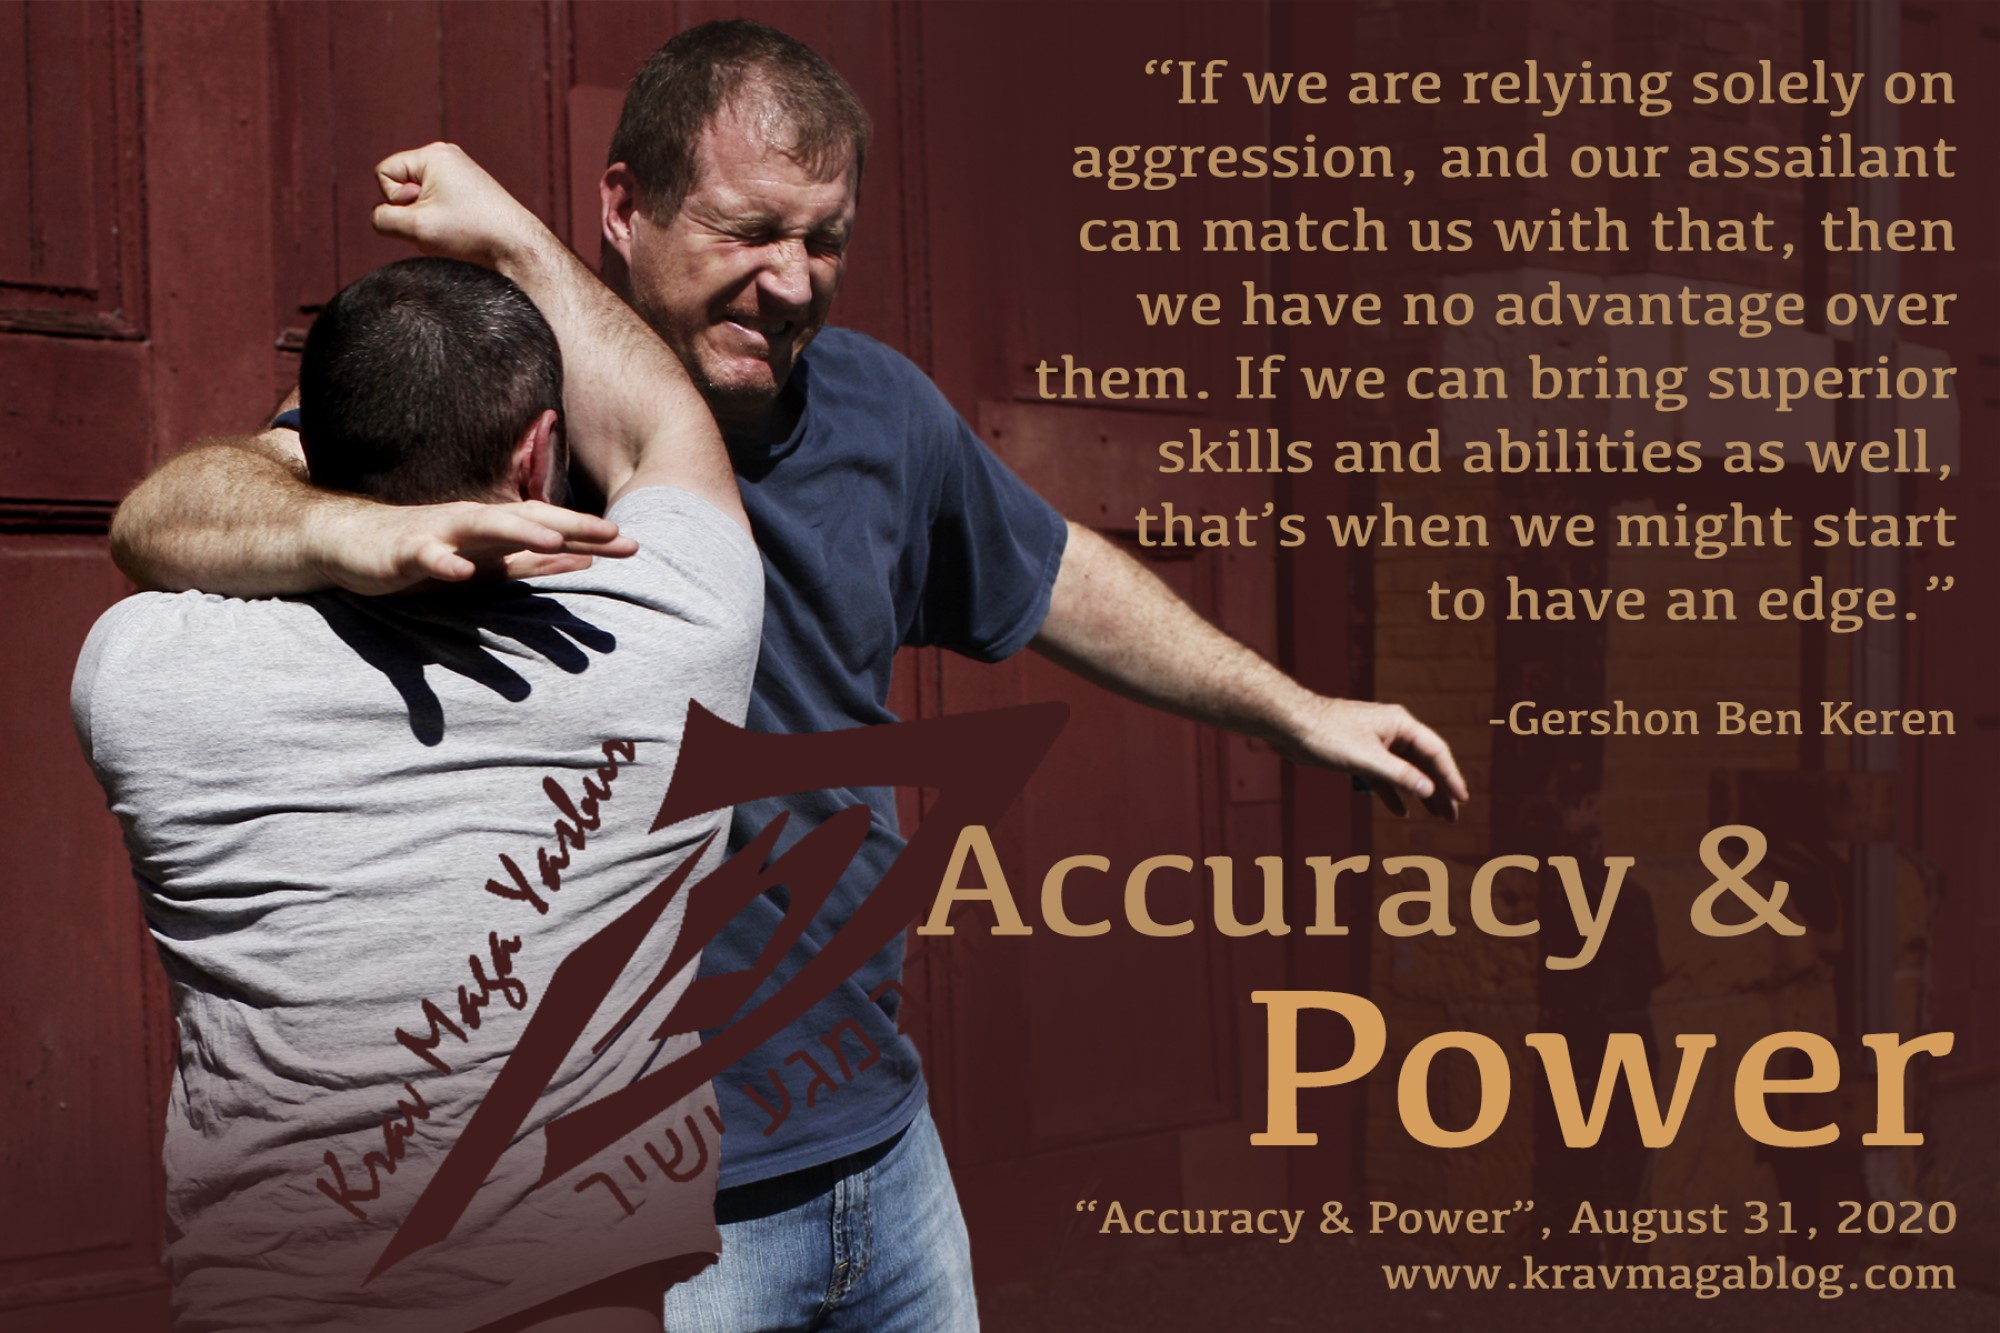 Blog About Accuracy & Power